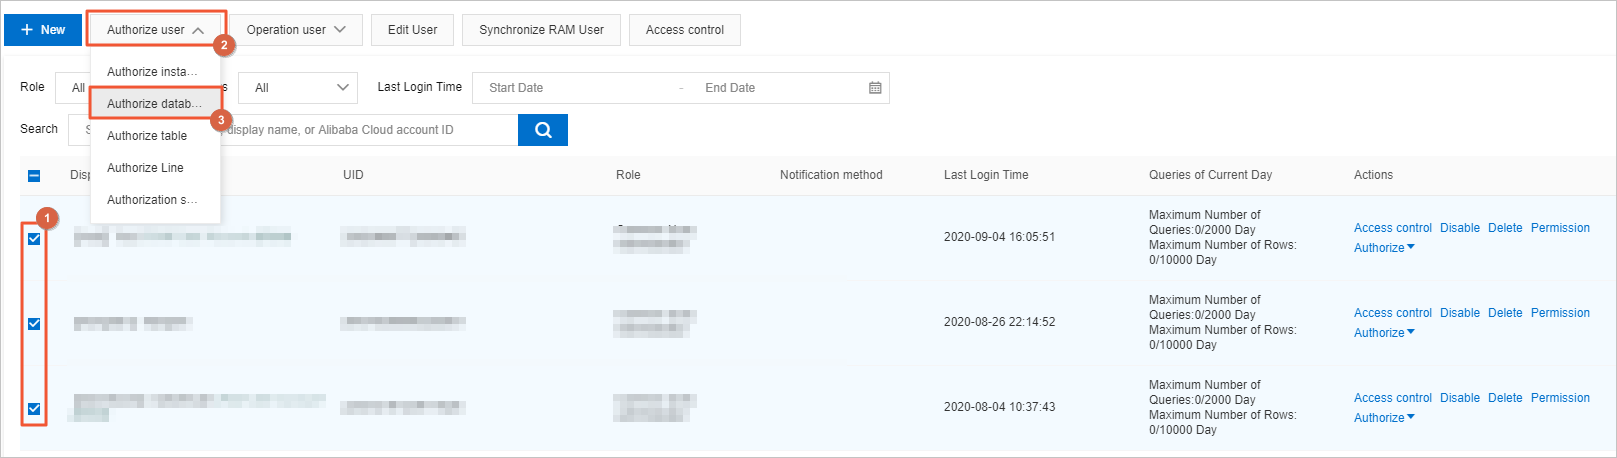 Grant permissions to multiple users at a time as a DMS administrator